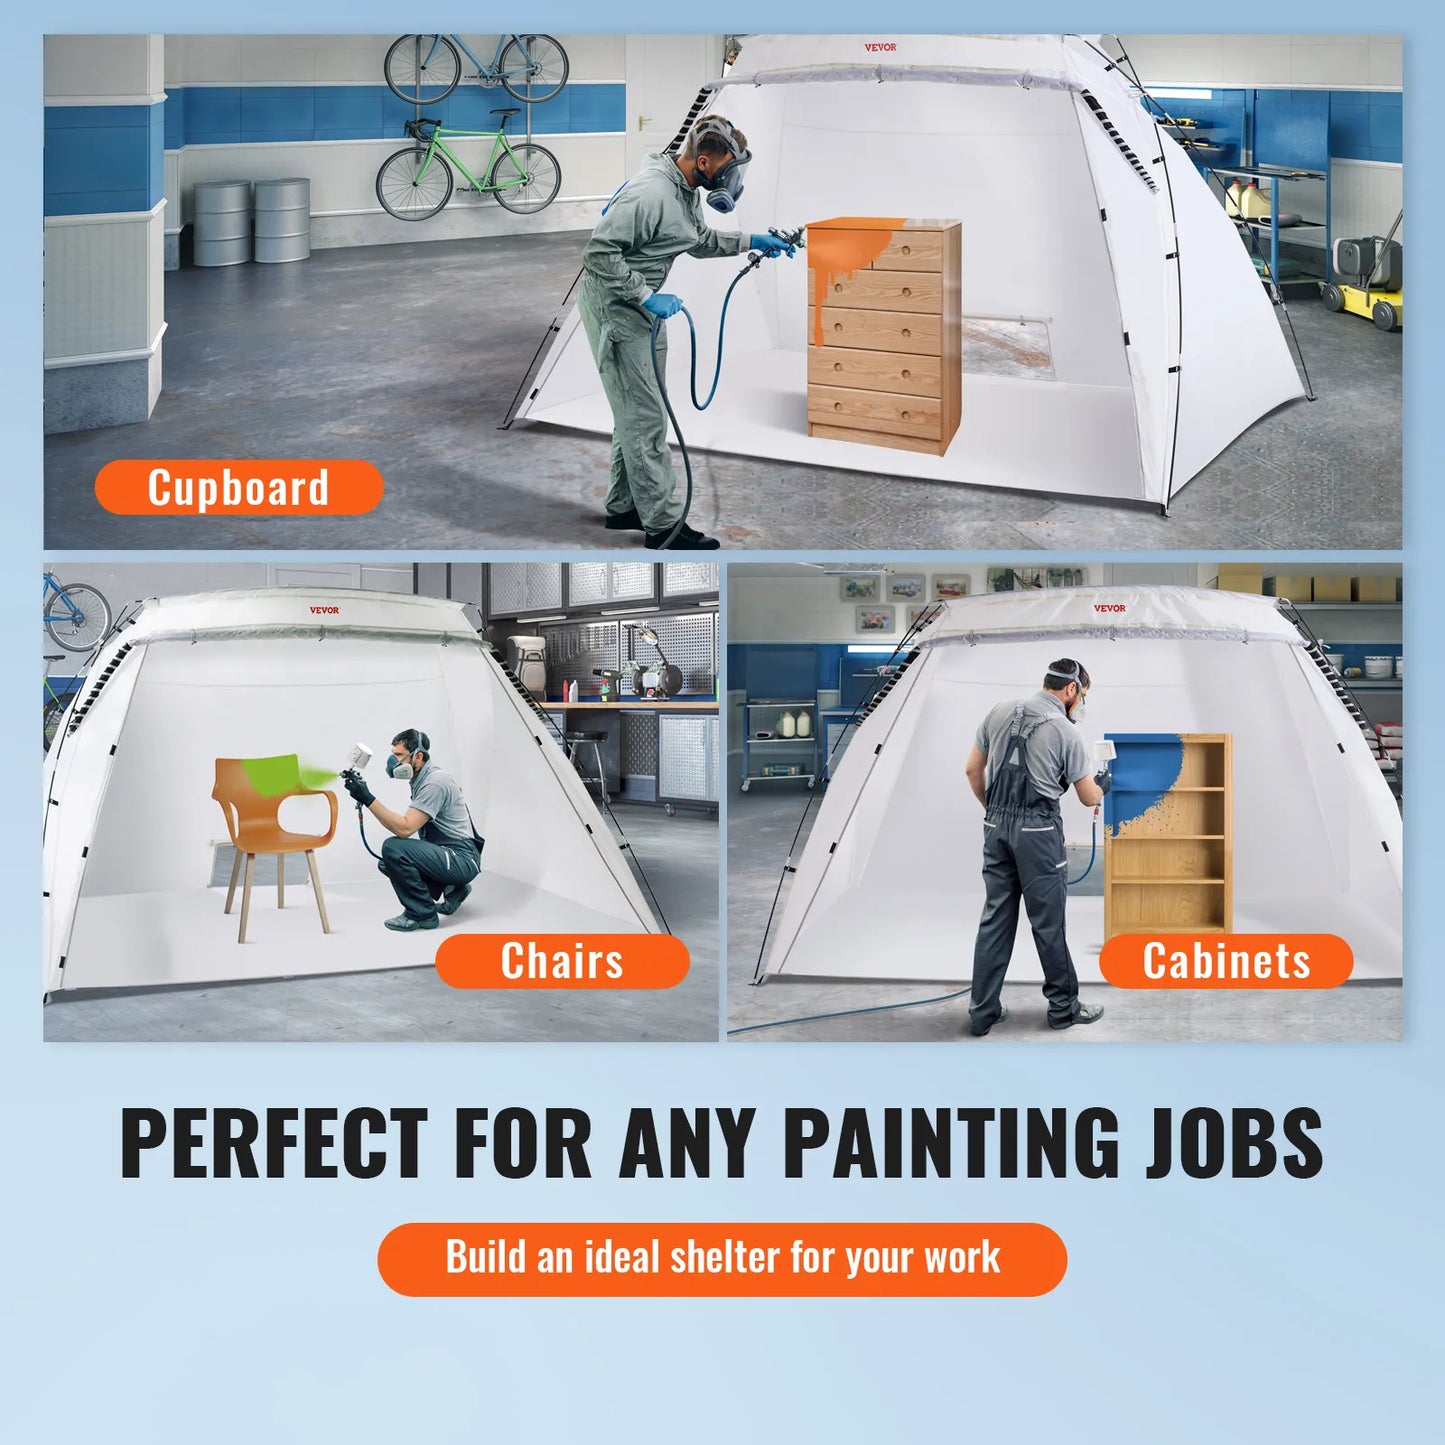 VEVOR Portable Paint Booth Shelter 7.5x5.2x5.2/10x7x6ft Foldable Spray Painting Tent